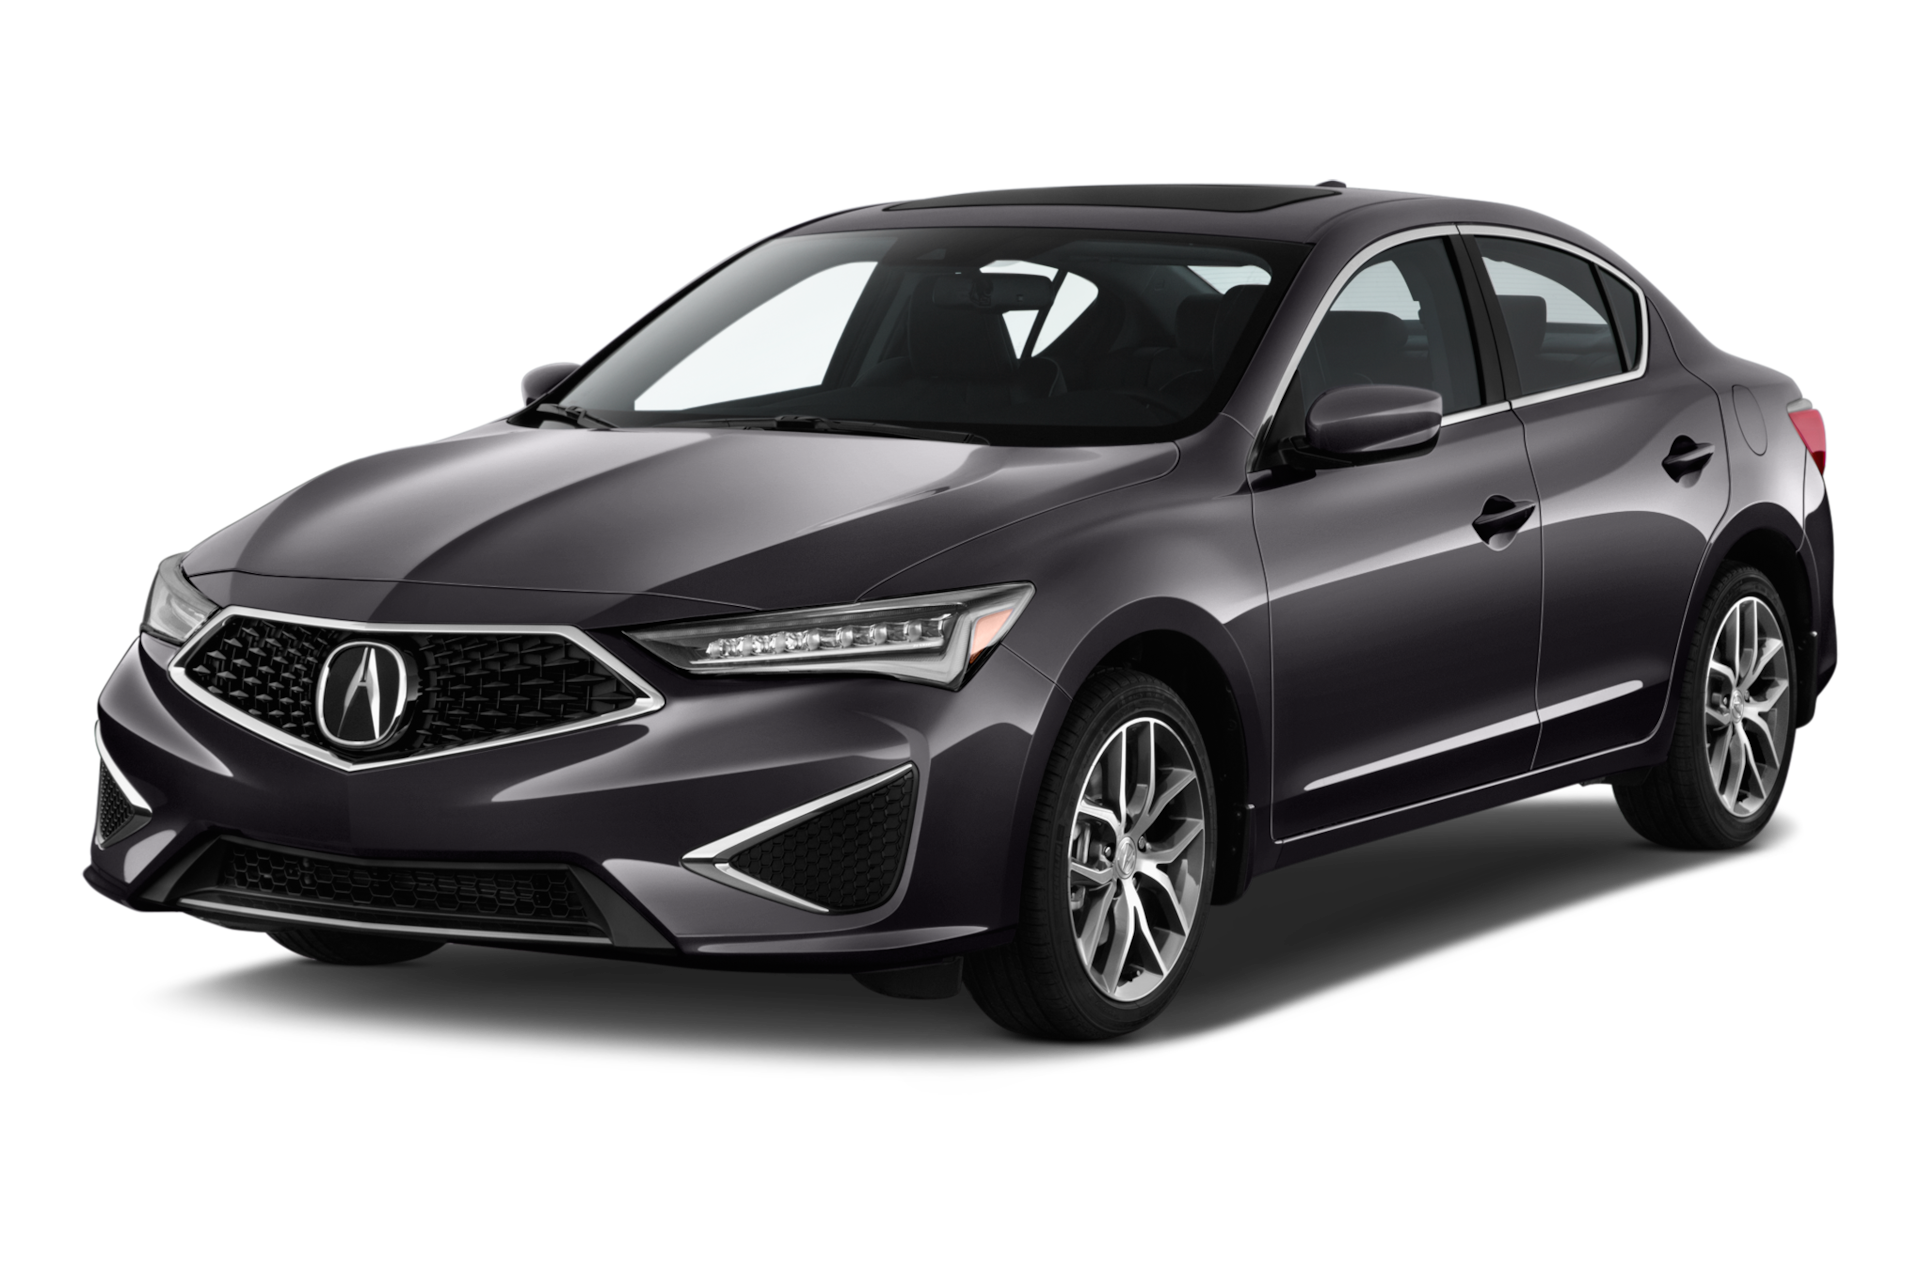 2019 Acura ILX Prices, Reviews, and Photos - MotorTrend